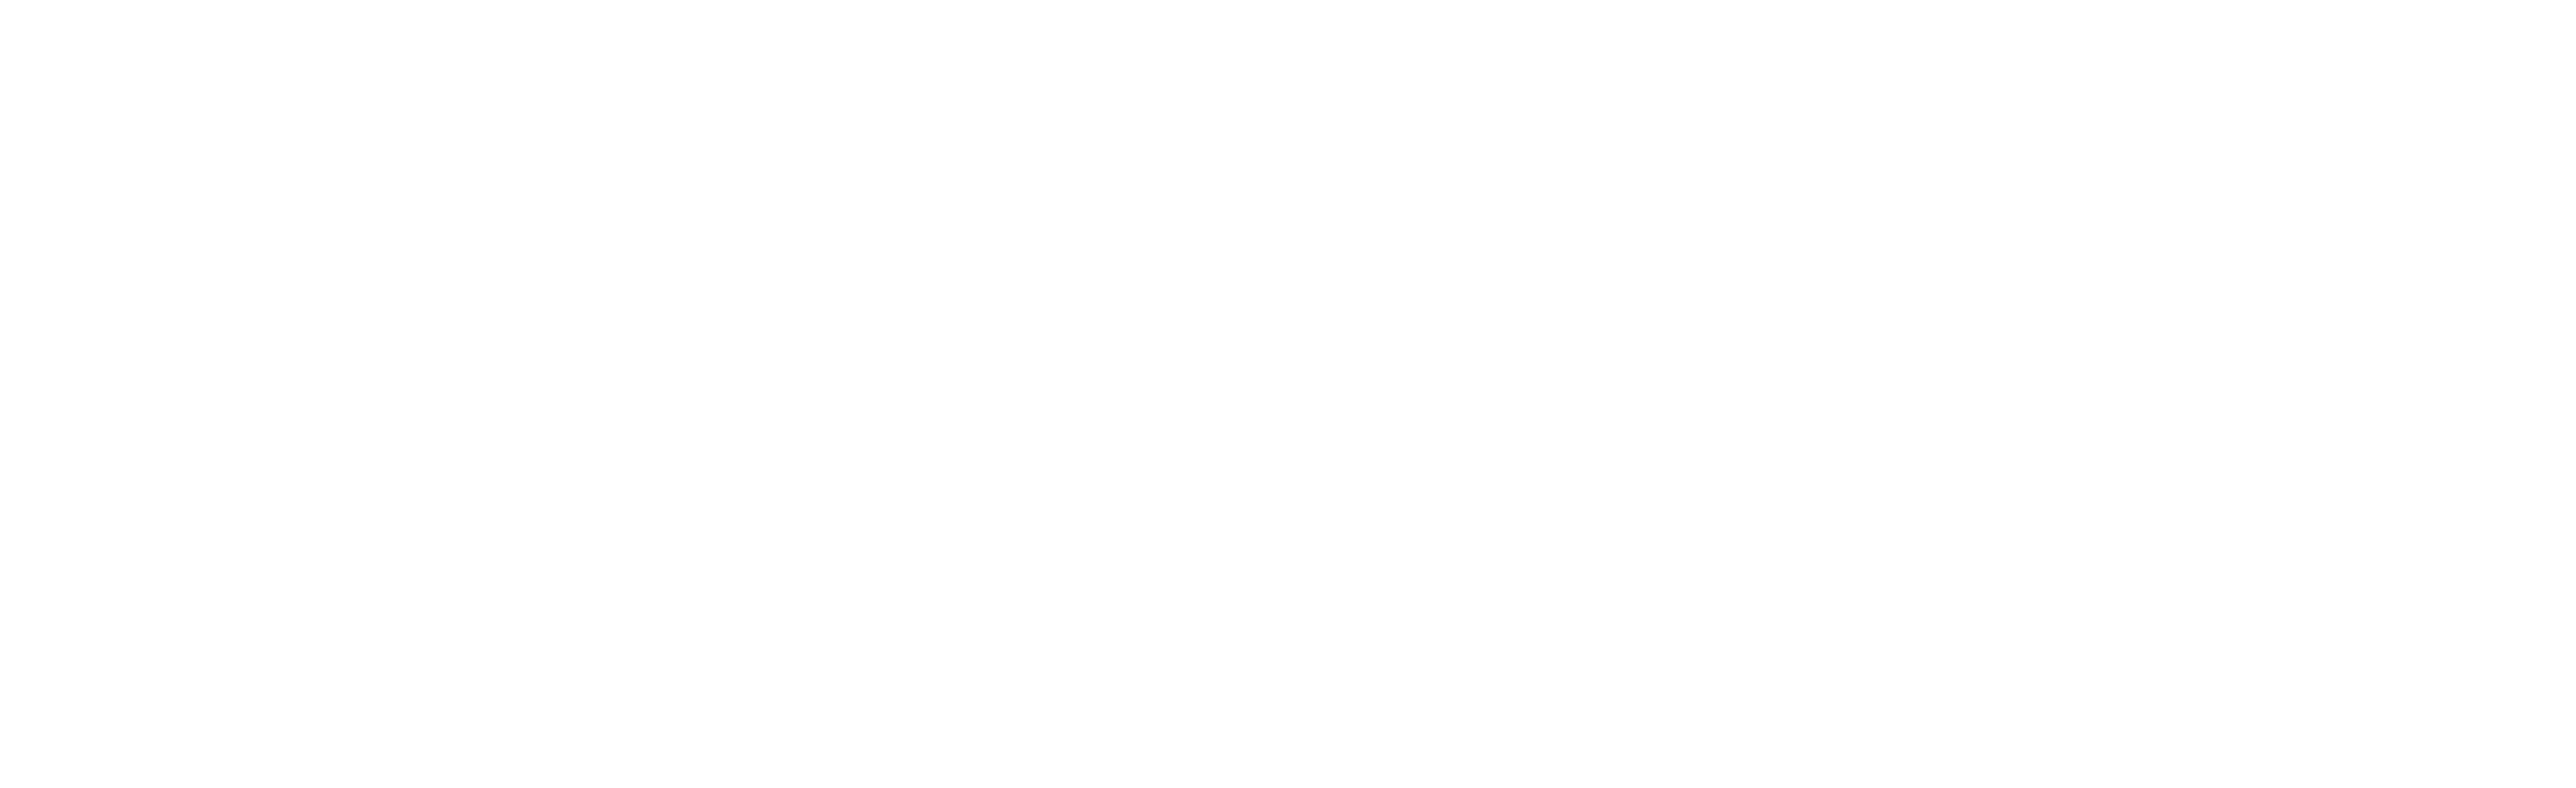 The Peer Mentoring Service in Partnership with the DWP logo in white